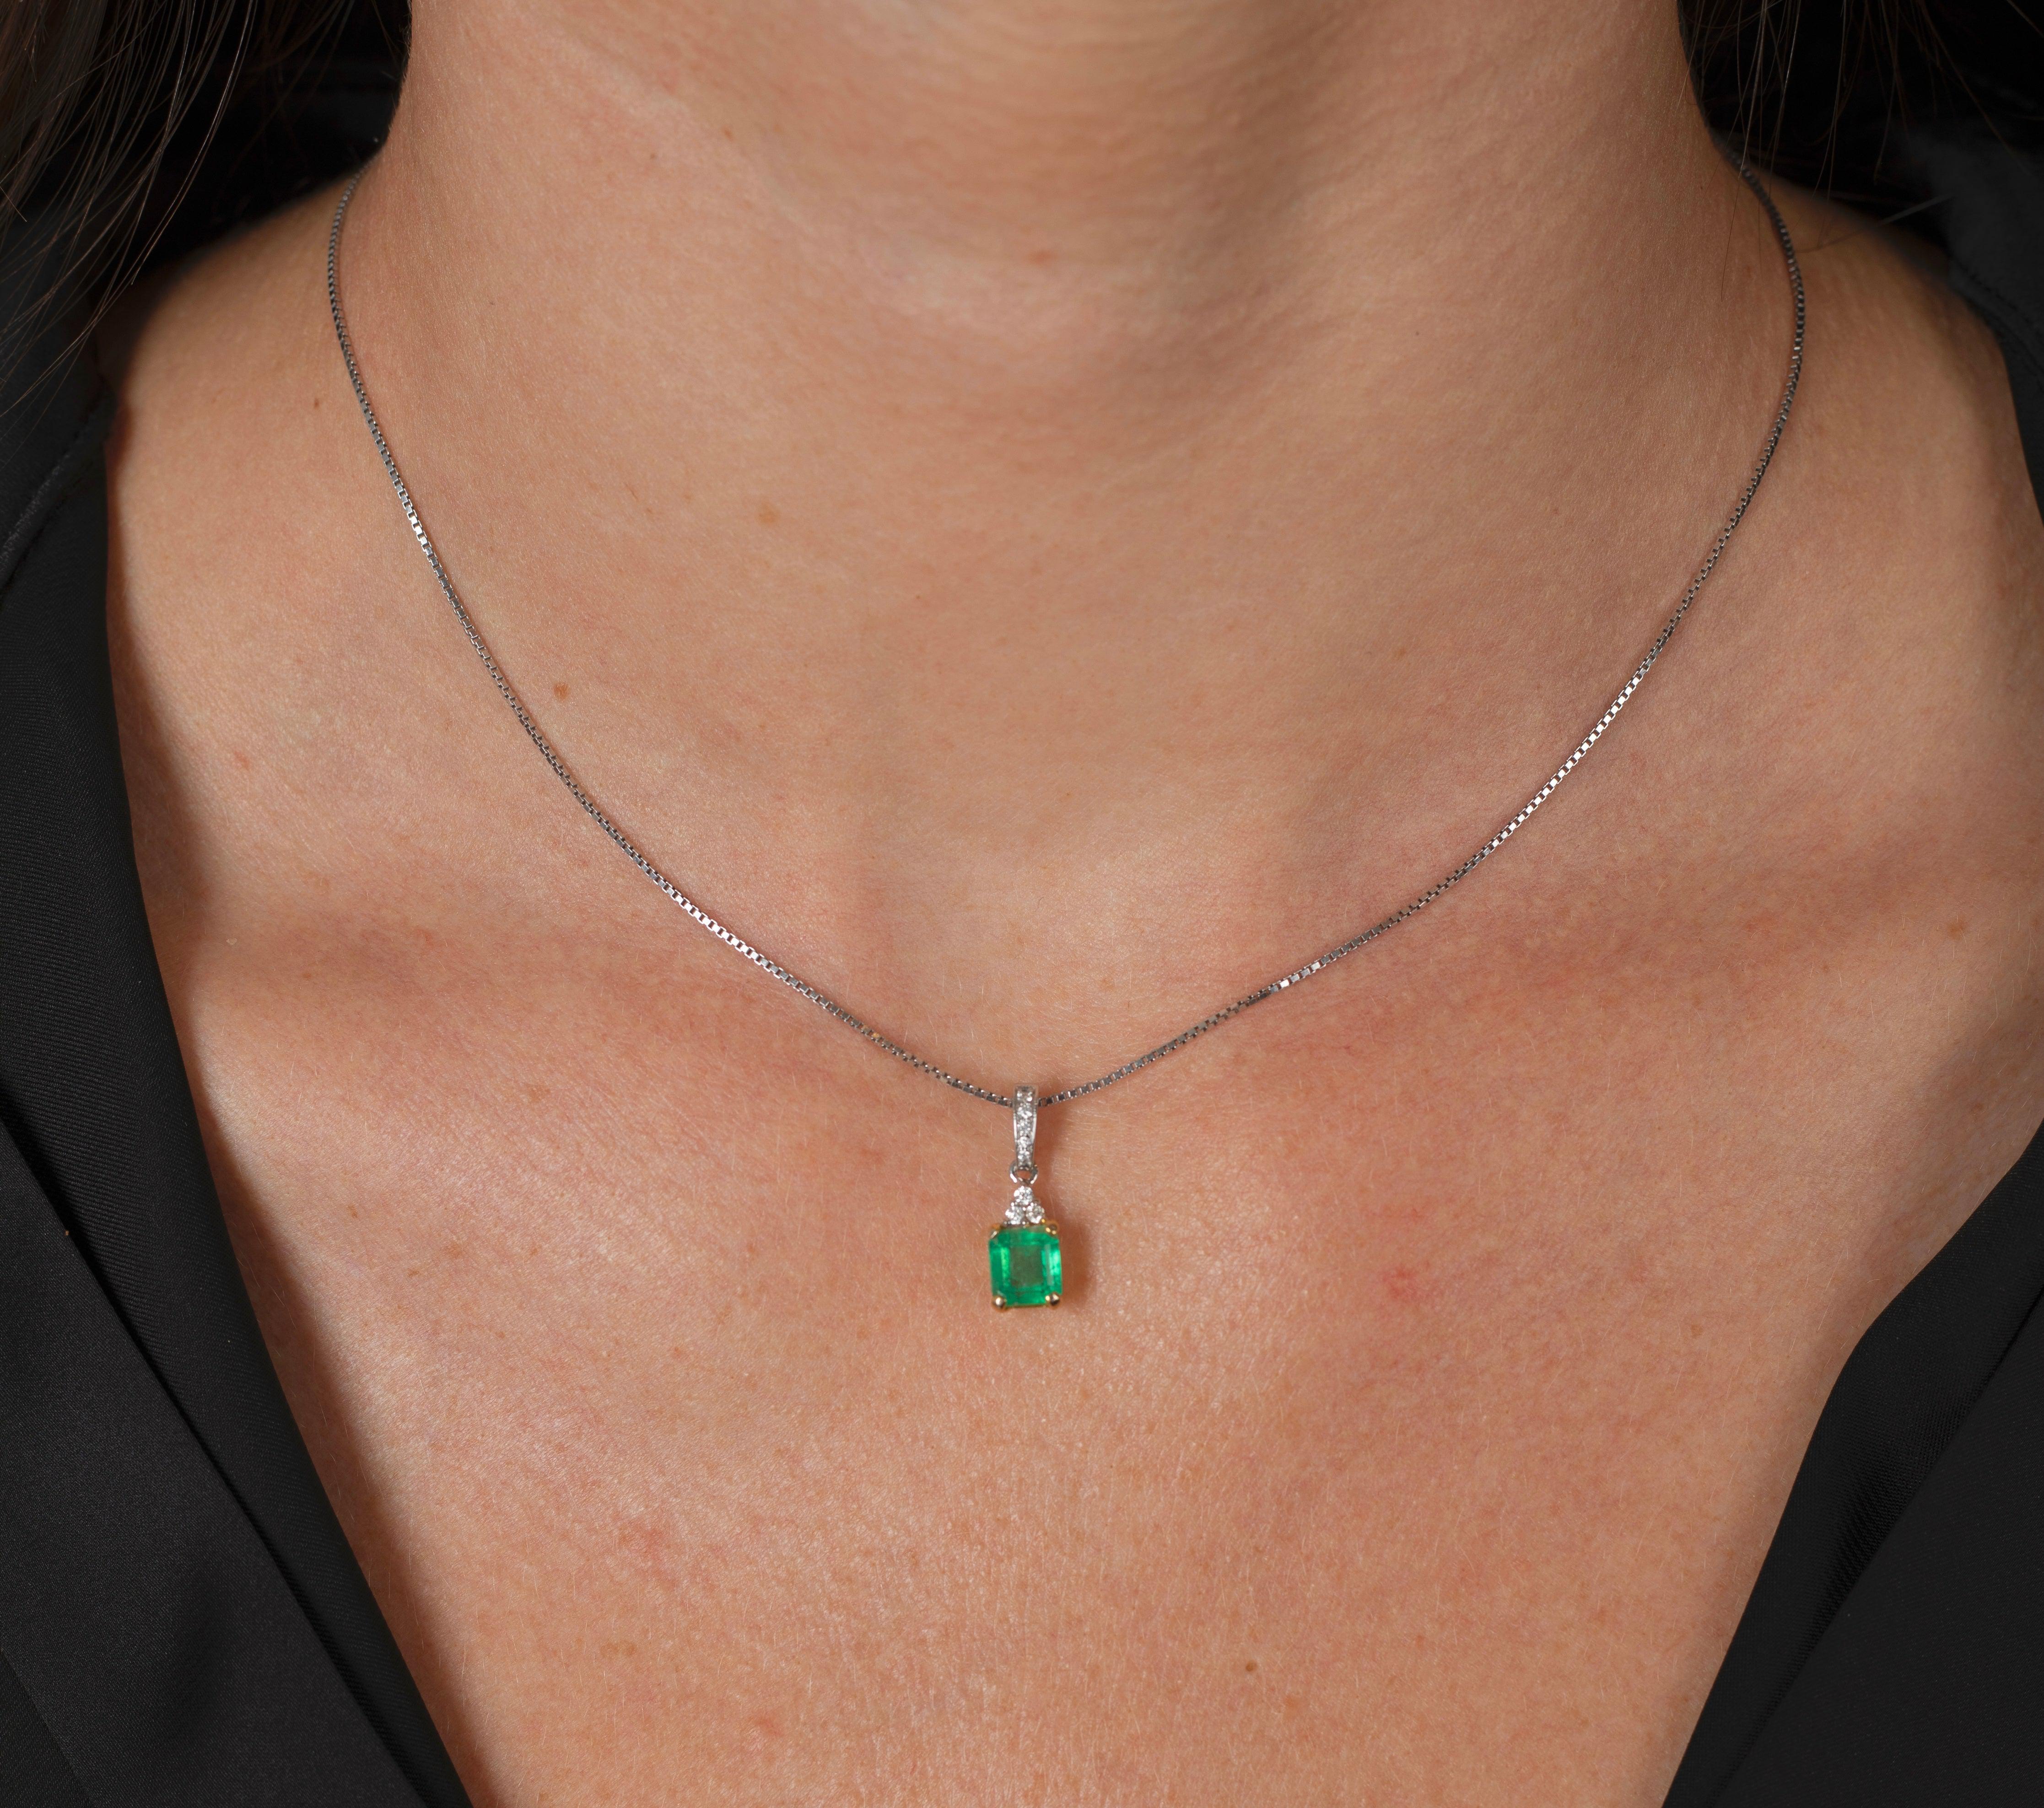 18k-Solid-Gold-Natural-Colombian-Emerald-and-3-Round-Diamonds-On-Top-Pendant-Necklace-Necklace.jpg